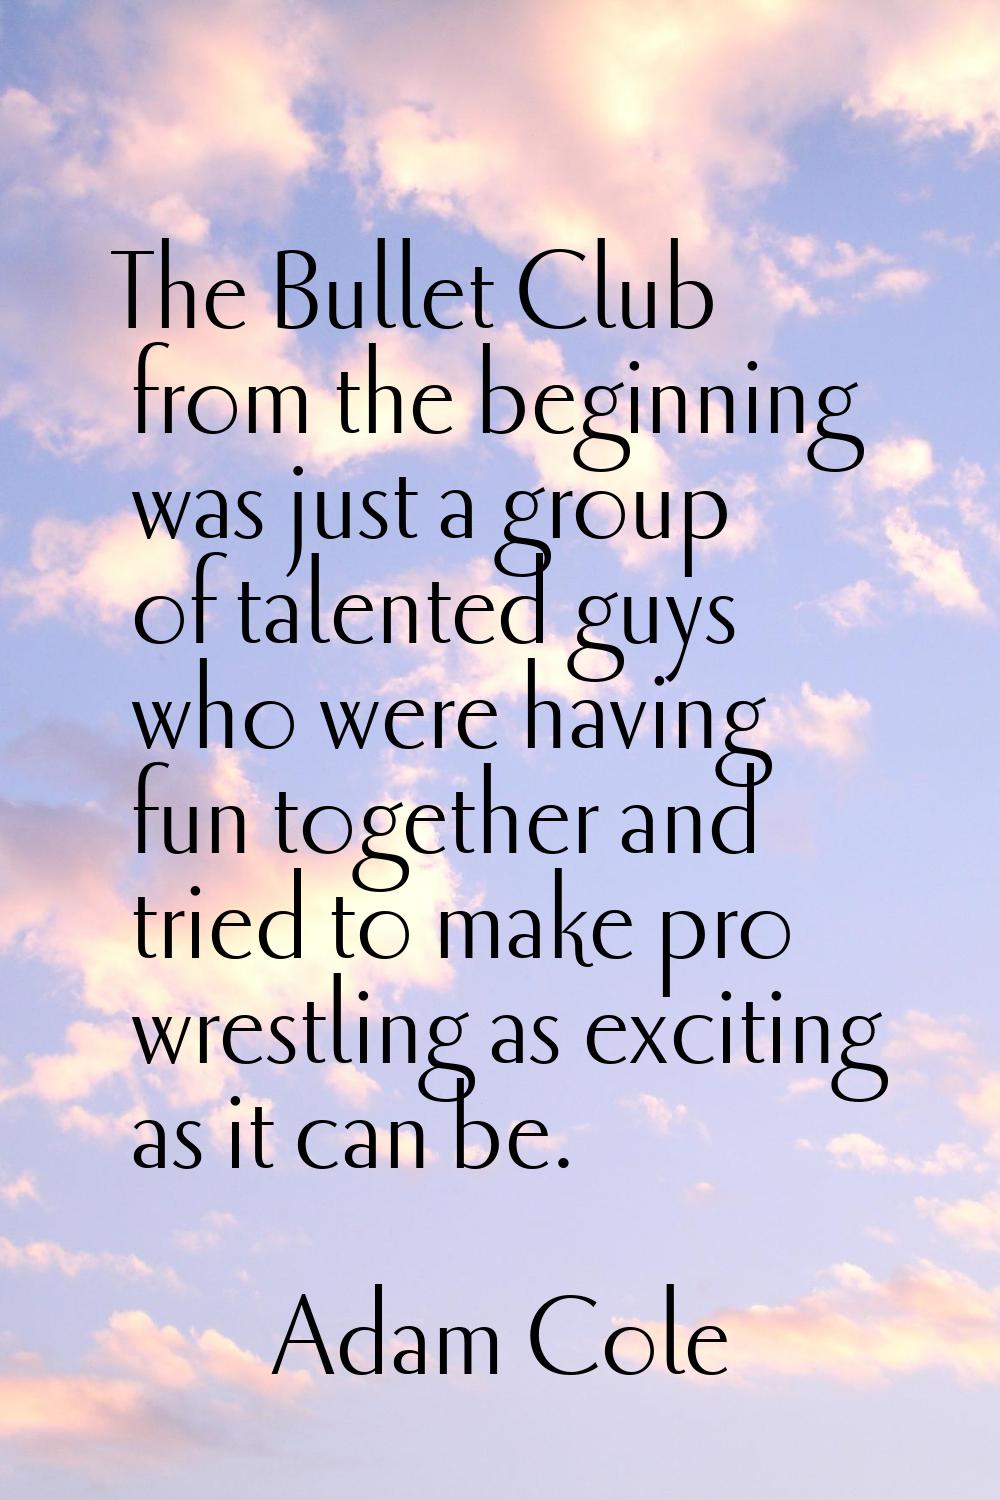 The Bullet Club from the beginning was just a group of talented guys who were having fun together a